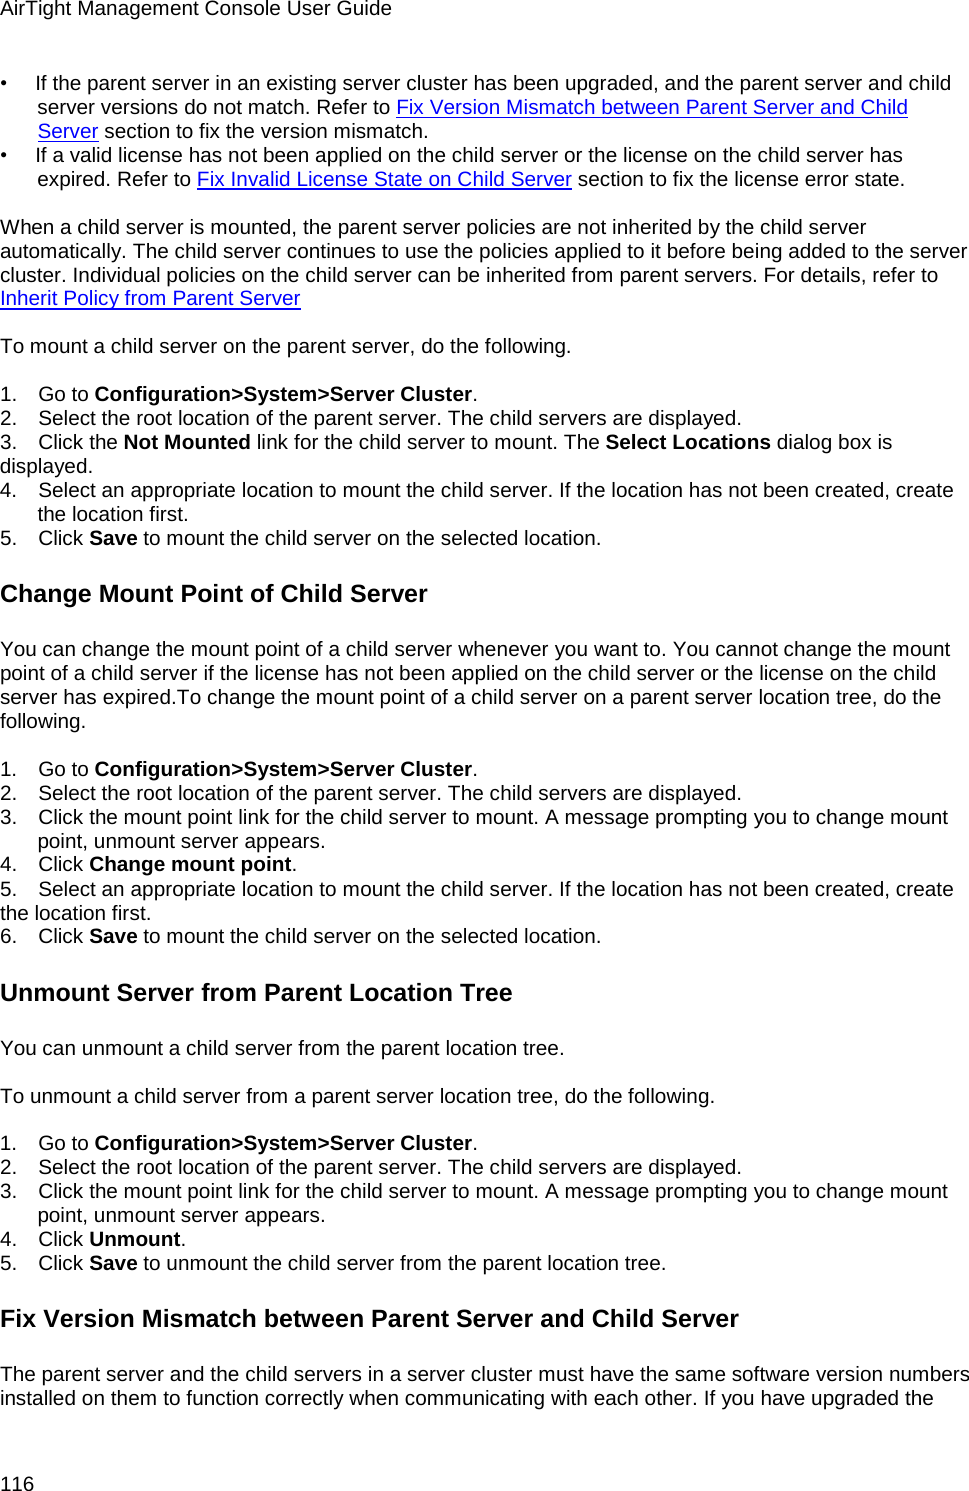 AirTight Management Console User Guide 116 •        If the parent server in an existing server cluster has been upgraded, and the parent server and child server versions do not match. Refer to Fix Version Mismatch between Parent Server and Child Server section to fix the version mismatch. •        If a valid license has not been applied on the child server or the license on the child server has expired. Refer to Fix Invalid License State on Child Server section to fix the license error state.   When a child server is mounted, the parent server policies are not inherited by the child server automatically. The child server continues to use the policies applied to it before being added to the server cluster. Individual policies on the child server can be inherited from parent servers. For details, refer to Inherit Policy from Parent Server   To mount a child server on the parent server, do the following.   1.      Go to Configuration&gt;System&gt;Server Cluster. 2.      Select the root location of the parent server. The child servers are displayed. 3.      Click the Not Mounted link for the child server to mount. The Select Locations dialog box is displayed. 4.      Select an appropriate location to mount the child server. If the location has not been created, create the location first. 5.      Click Save to mount the child server on the selected location. Change Mount Point of Child Server You can change the mount point of a child server whenever you want to. You cannot change the mount point of a child server if the license has not been applied on the child server or the license on the child server has expired.To change the mount point of a child server on a parent server location tree, do the following.   1.      Go to Configuration&gt;System&gt;Server Cluster. 2.      Select the root location of the parent server. The child servers are displayed. 3.      Click the mount point link for the child server to mount. A message prompting you to change mount point, unmount server appears. 4.      Click Change mount point. 5.      Select an appropriate location to mount the child server. If the location has not been created, create the location first. 6.      Click Save to mount the child server on the selected location. Unmount Server from Parent Location Tree You can unmount a child server from the parent location tree.   To unmount a child server from a parent server location tree, do the following.   1.      Go to Configuration&gt;System&gt;Server Cluster. 2.      Select the root location of the parent server. The child servers are displayed. 3.      Click the mount point link for the child server to mount. A message prompting you to change mount point, unmount server appears. 4.      Click Unmount. 5.      Click Save to unmount the child server from the parent location tree. Fix Version Mismatch between Parent Server and Child Server The parent server and the child servers in a server cluster must have the same software version numbers installed on them to function correctly when communicating with each other. If you have upgraded the 